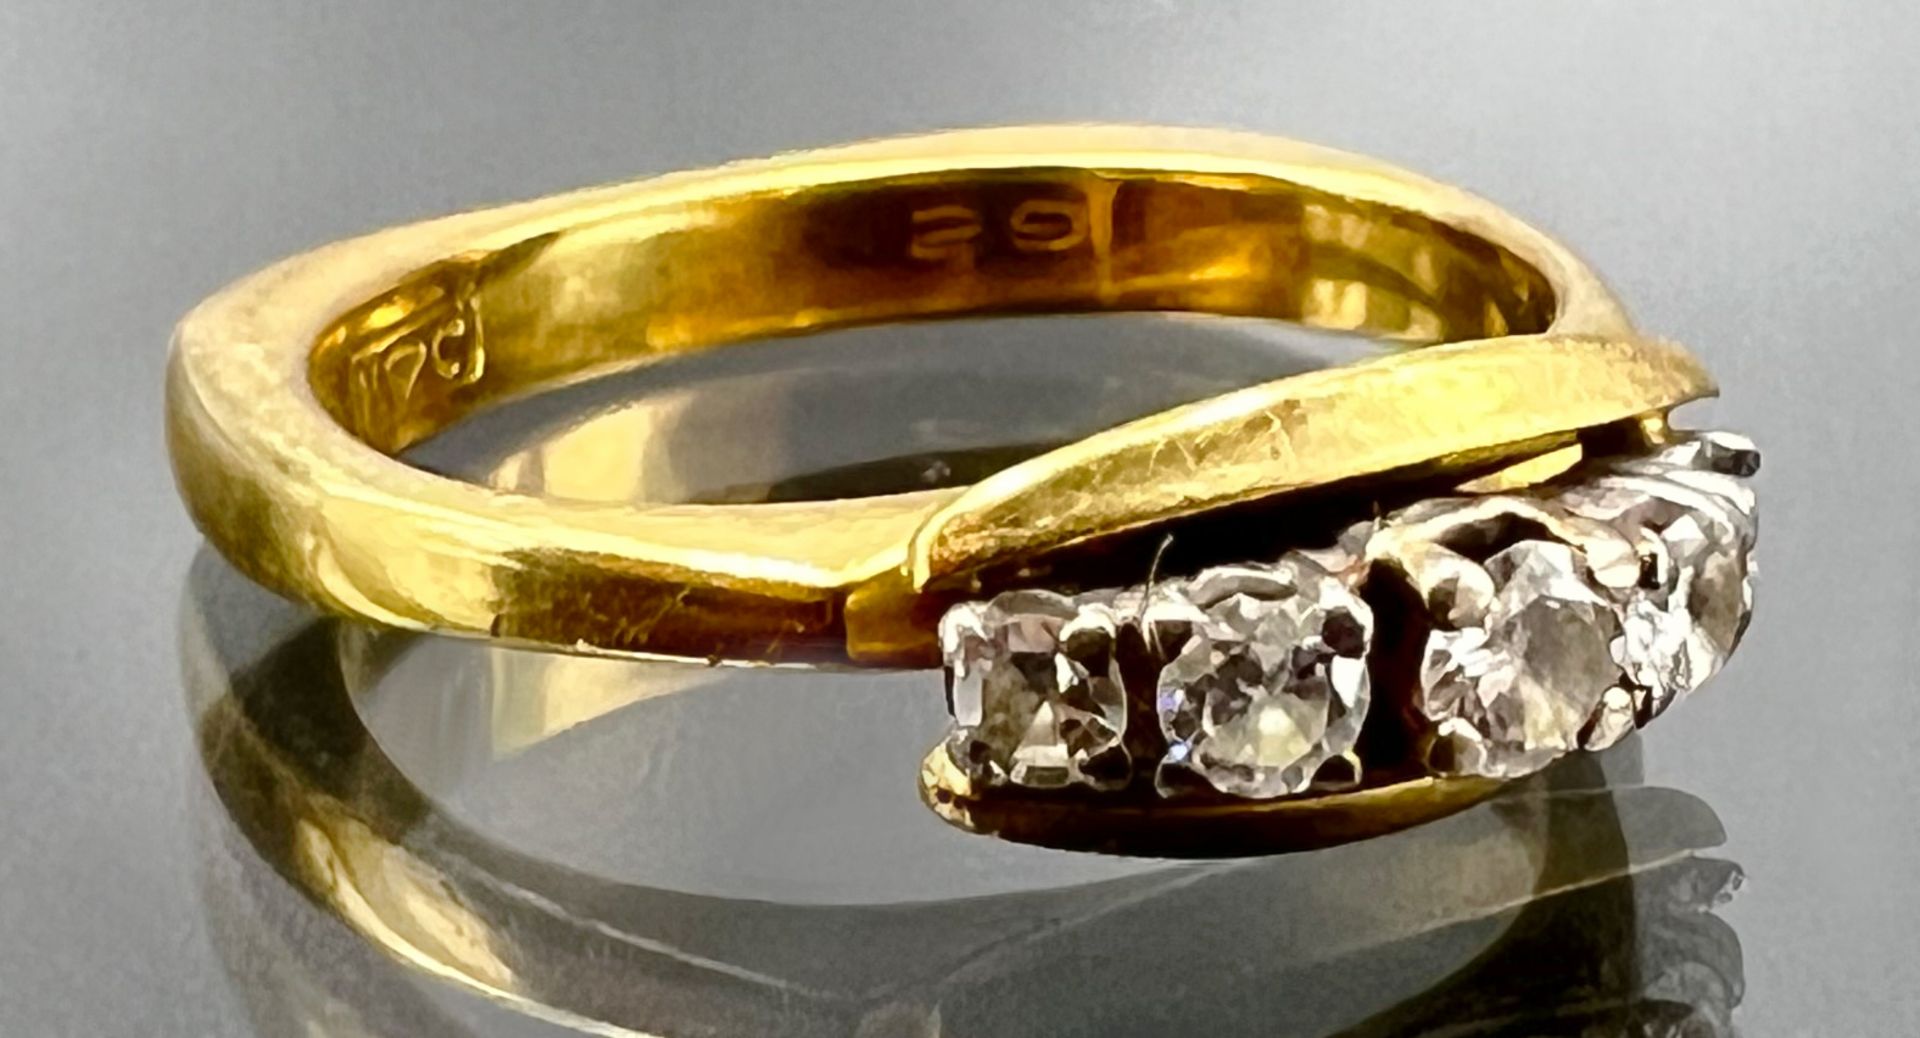 Ladies' ring 750 yellow gold with 4 diamonds. - Image 2 of 7